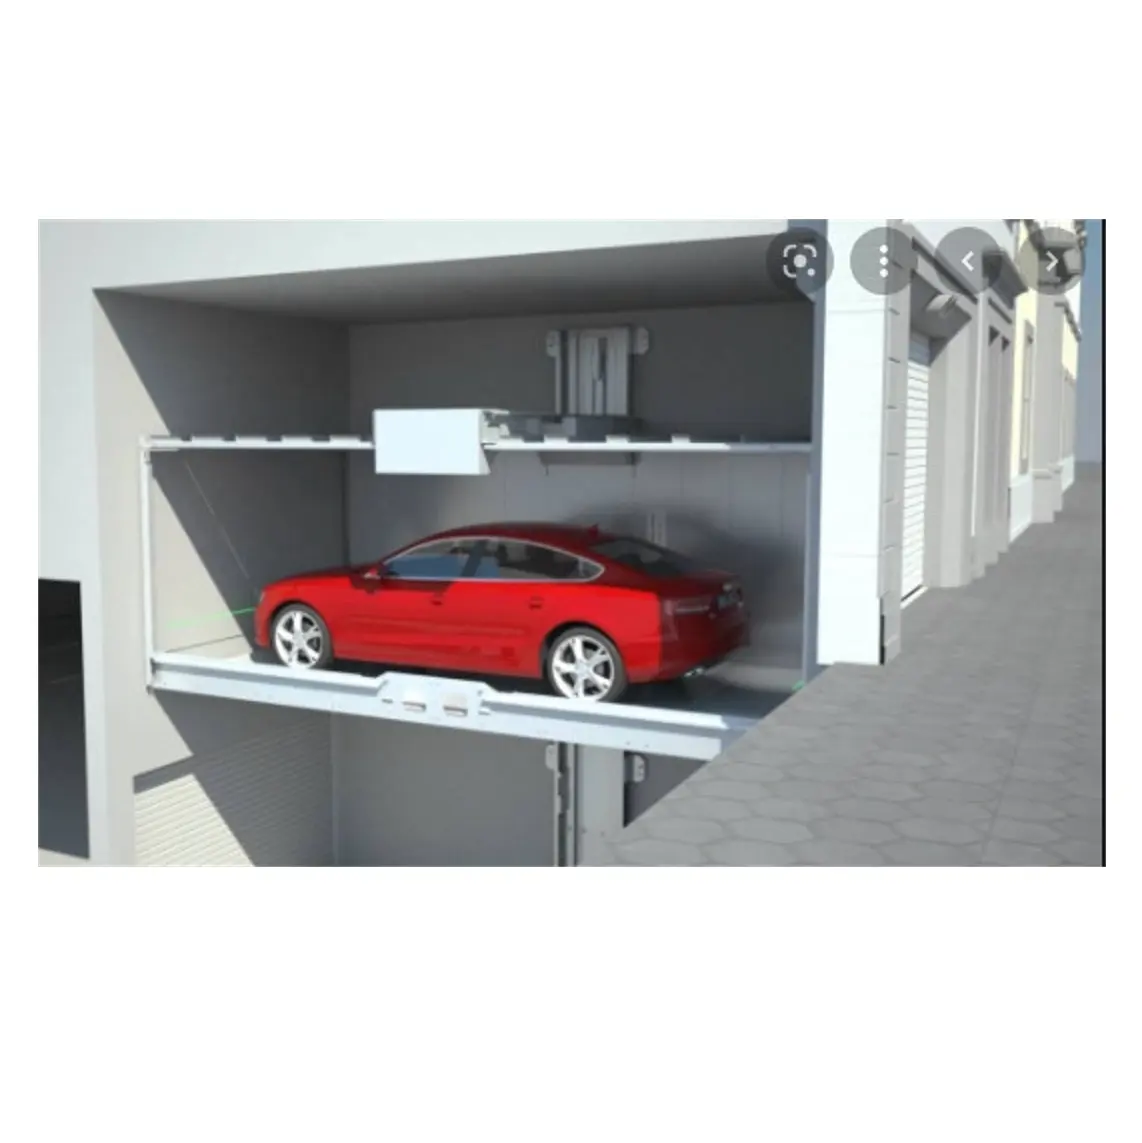 1600KG 5.0m/s Residential Car Elevator in home VVVF Controlled automobile elevator car auto lift